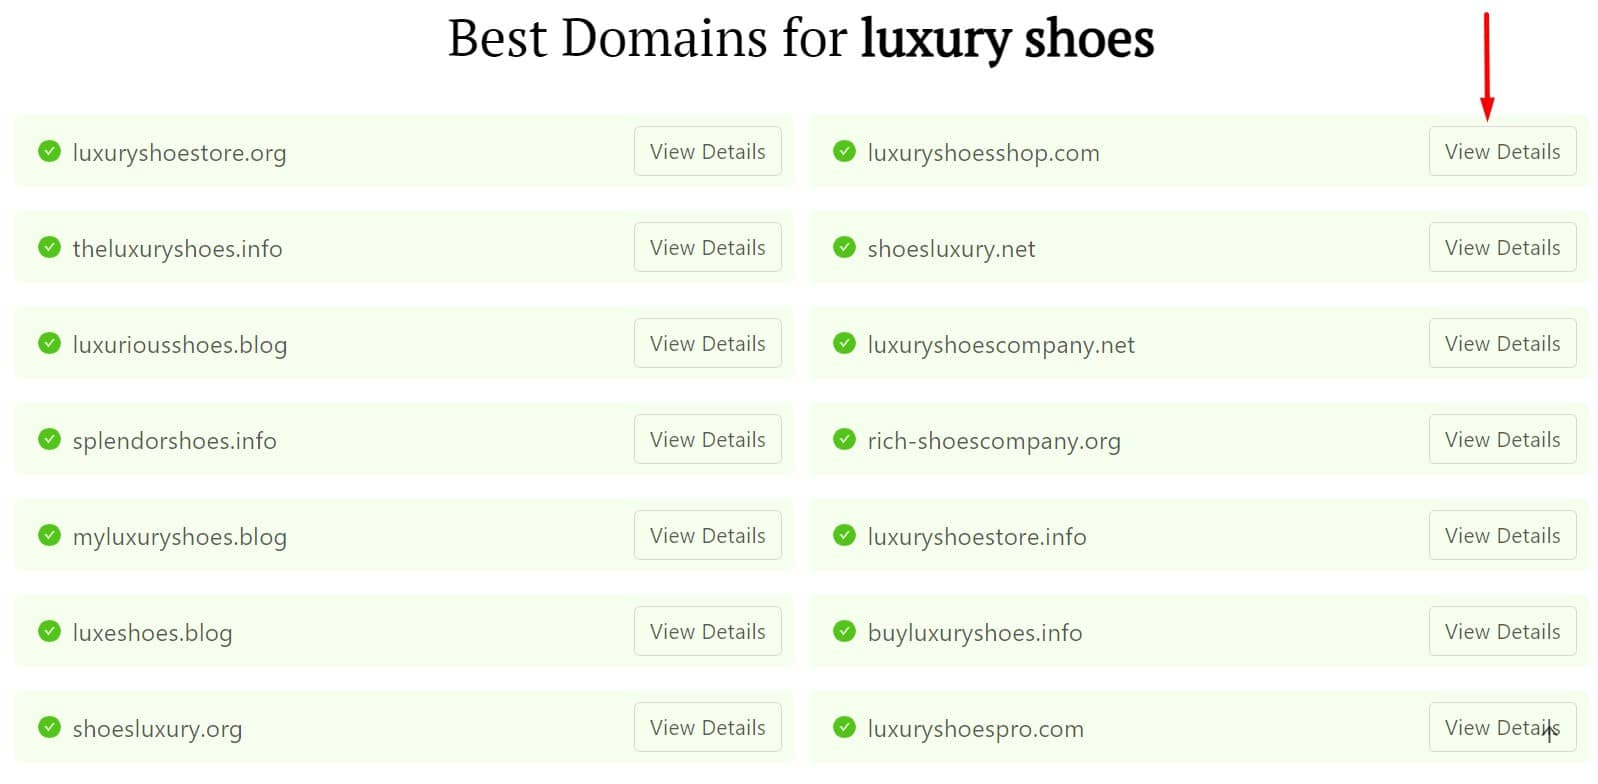 DomainWheel shoe company names search results for "luxury shoes" with a red arrow pointing to the "View Details" button in the top right search result